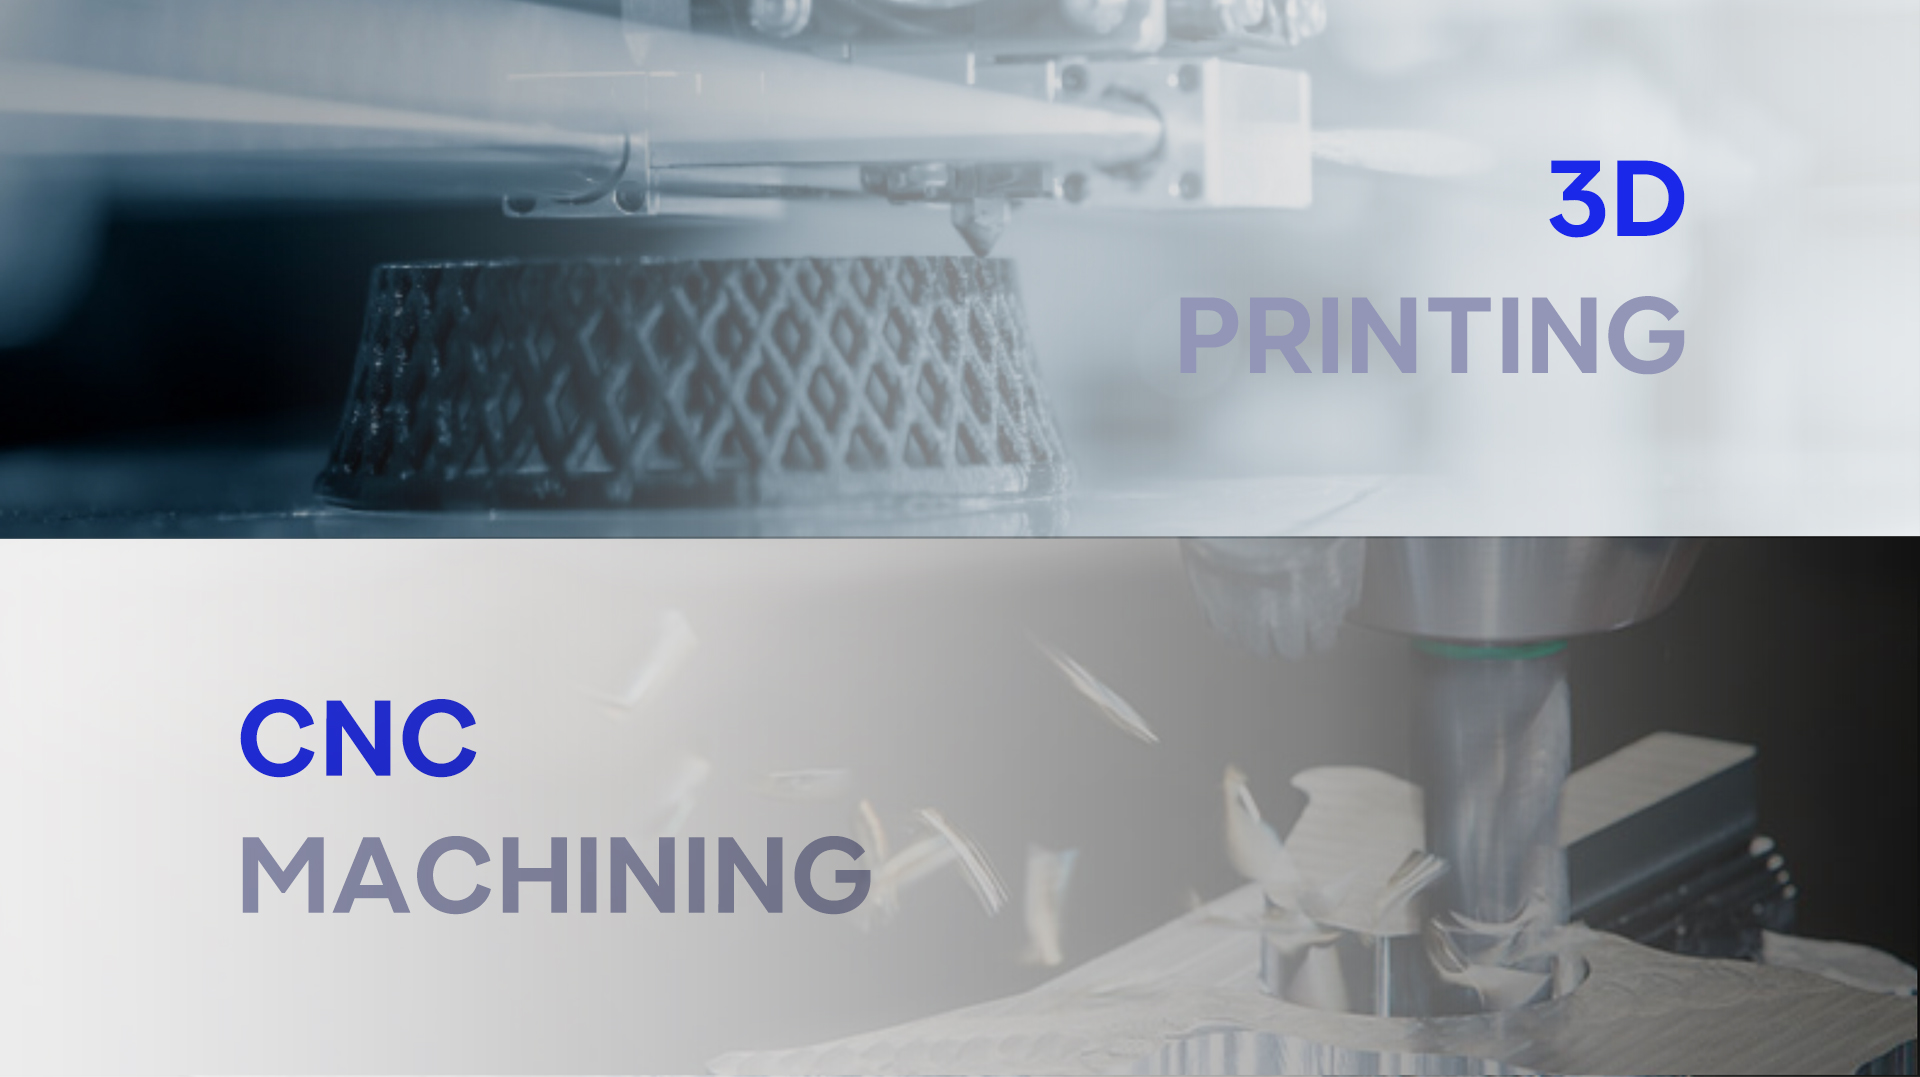 CNC Machining vs 3D Printing: Which is Better for Rapid Prototyping Projects?